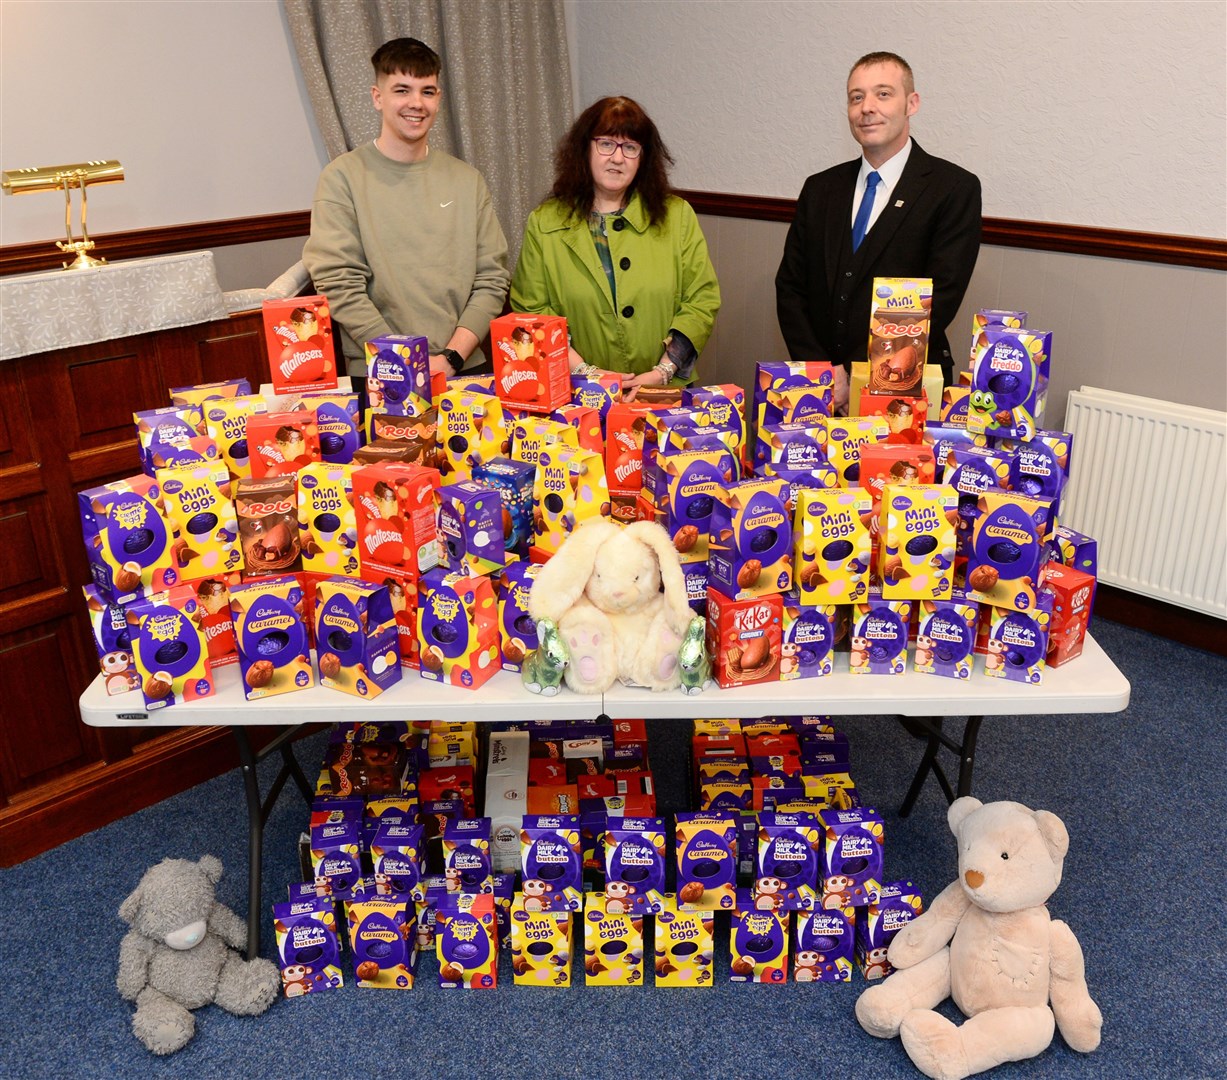 D. Gunn Funeral Home Dingwall Easter egg appeal..Gary Clark(left) of Funeral Home with 195 eggs which will give 3 locally charities 65 each,collecting there share are Janette Douglas and Josh Hutchison from The Place Alness. Picture Gary Anthony